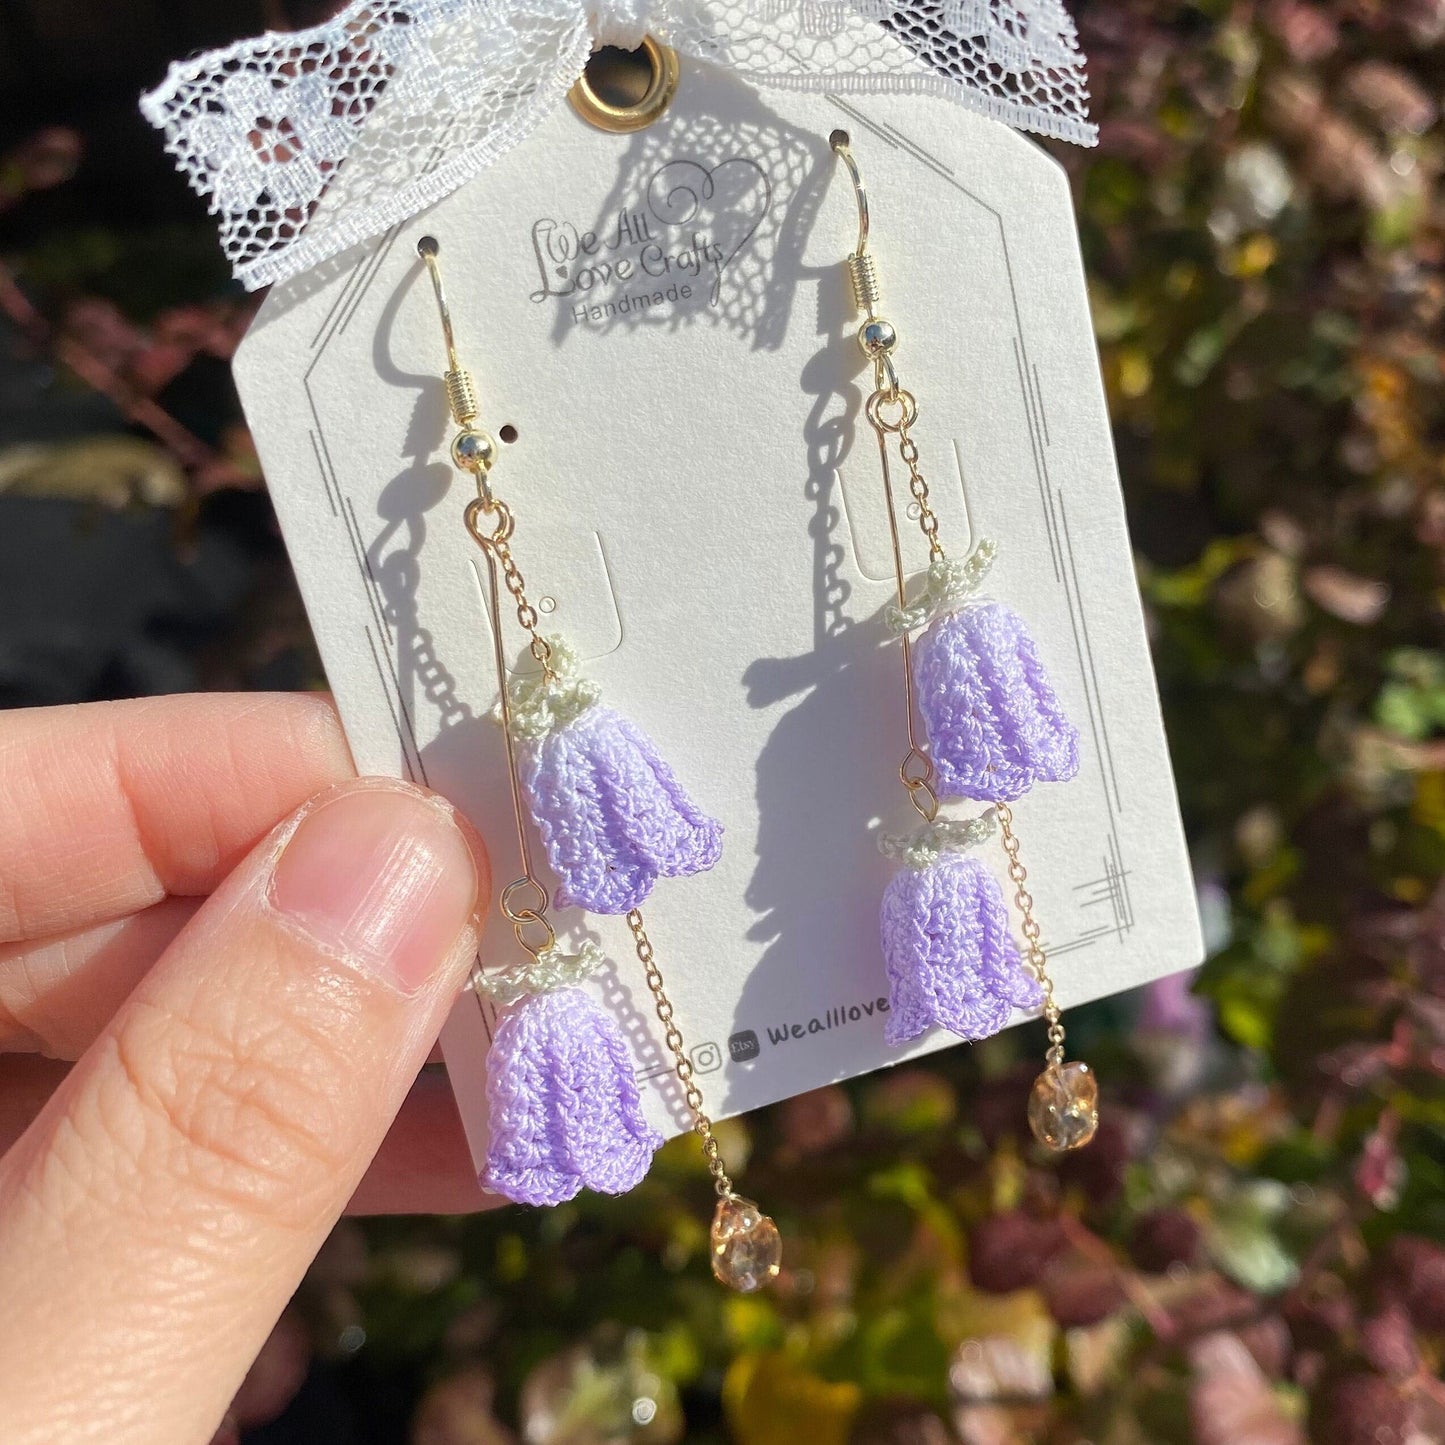 Load image into Gallery viewer, Purple bell shaped clematis flower ring crochet dangle earrings/Microcrochet/925 sterling silver/gift for her/Knitting handmade jewelry
